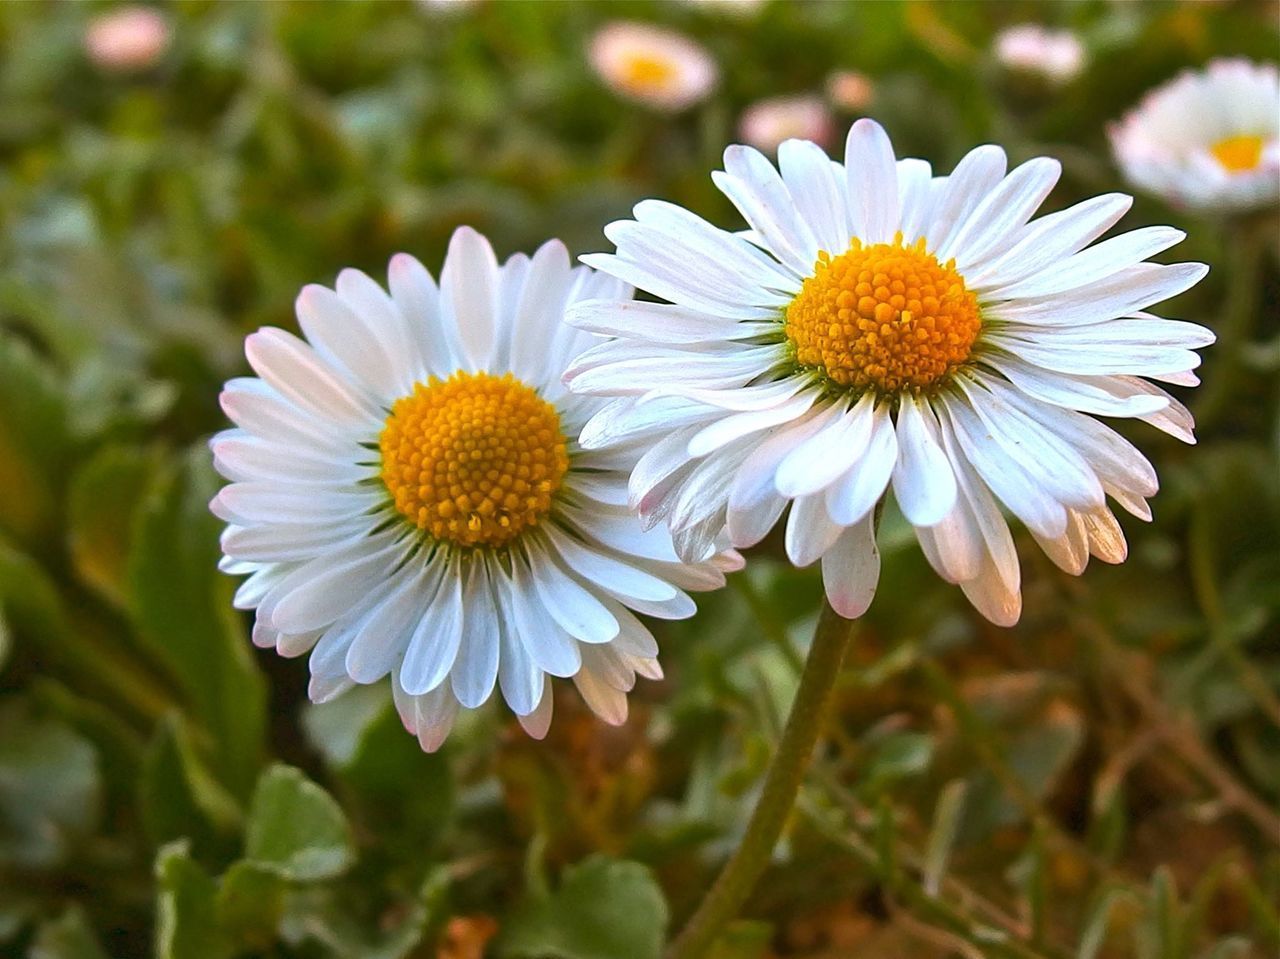 CLOSE-UP OF WHITE DAISY FLOWERS IN FIELD